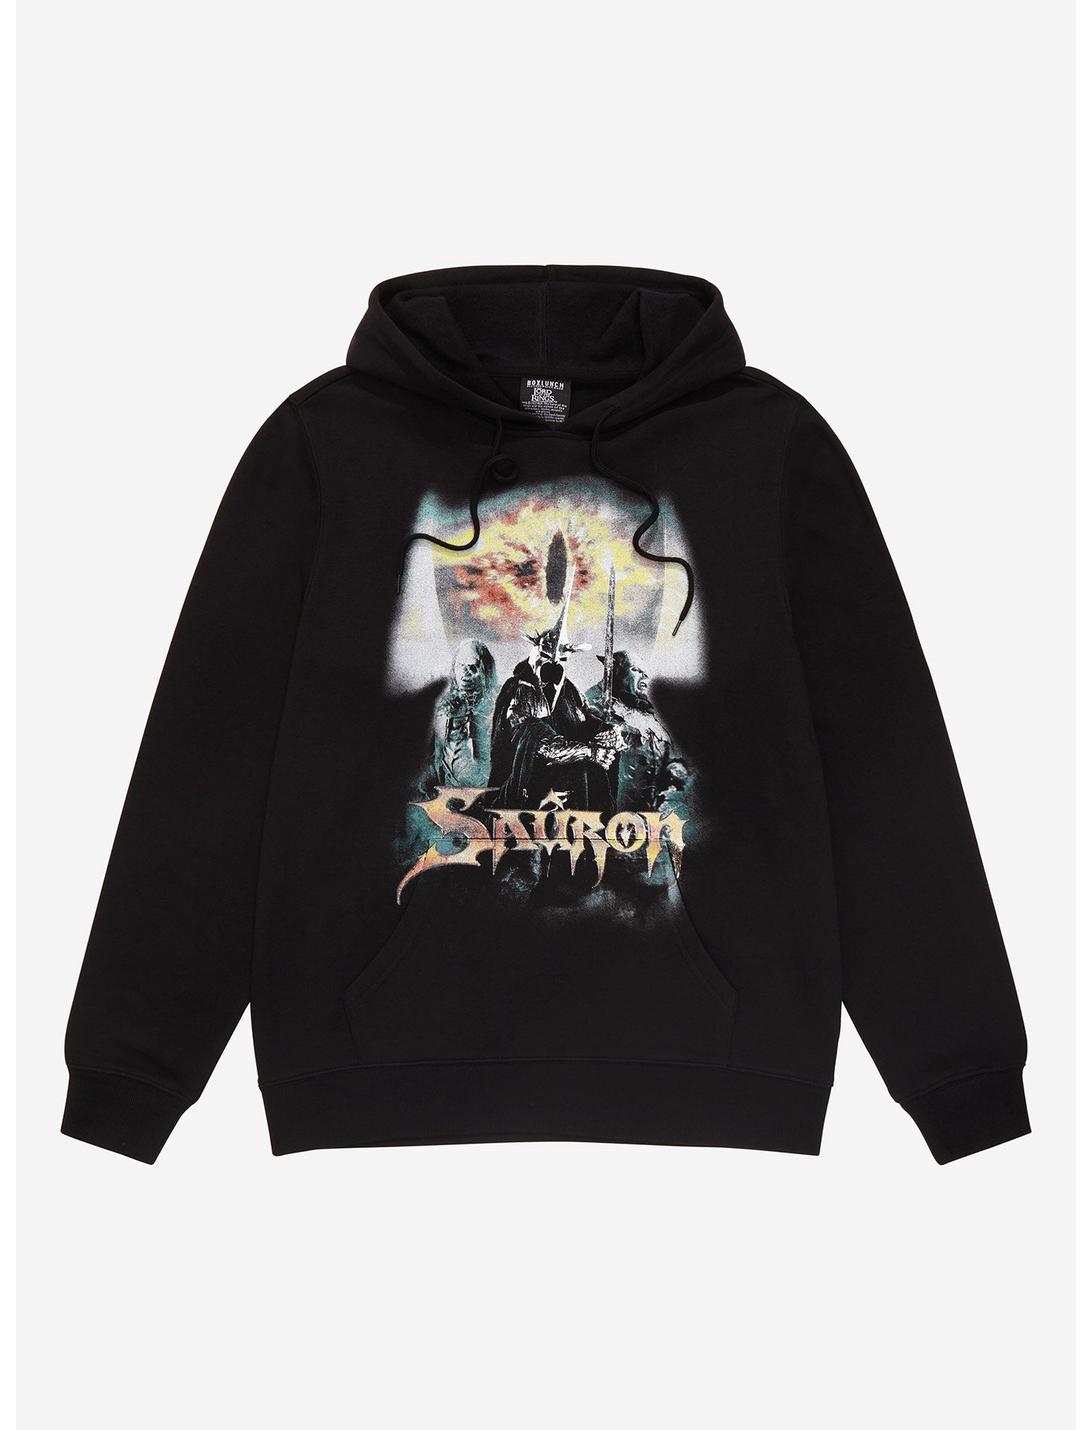 The Lord of the Rings Sauron Print Hoodie, BLACK, hi-res